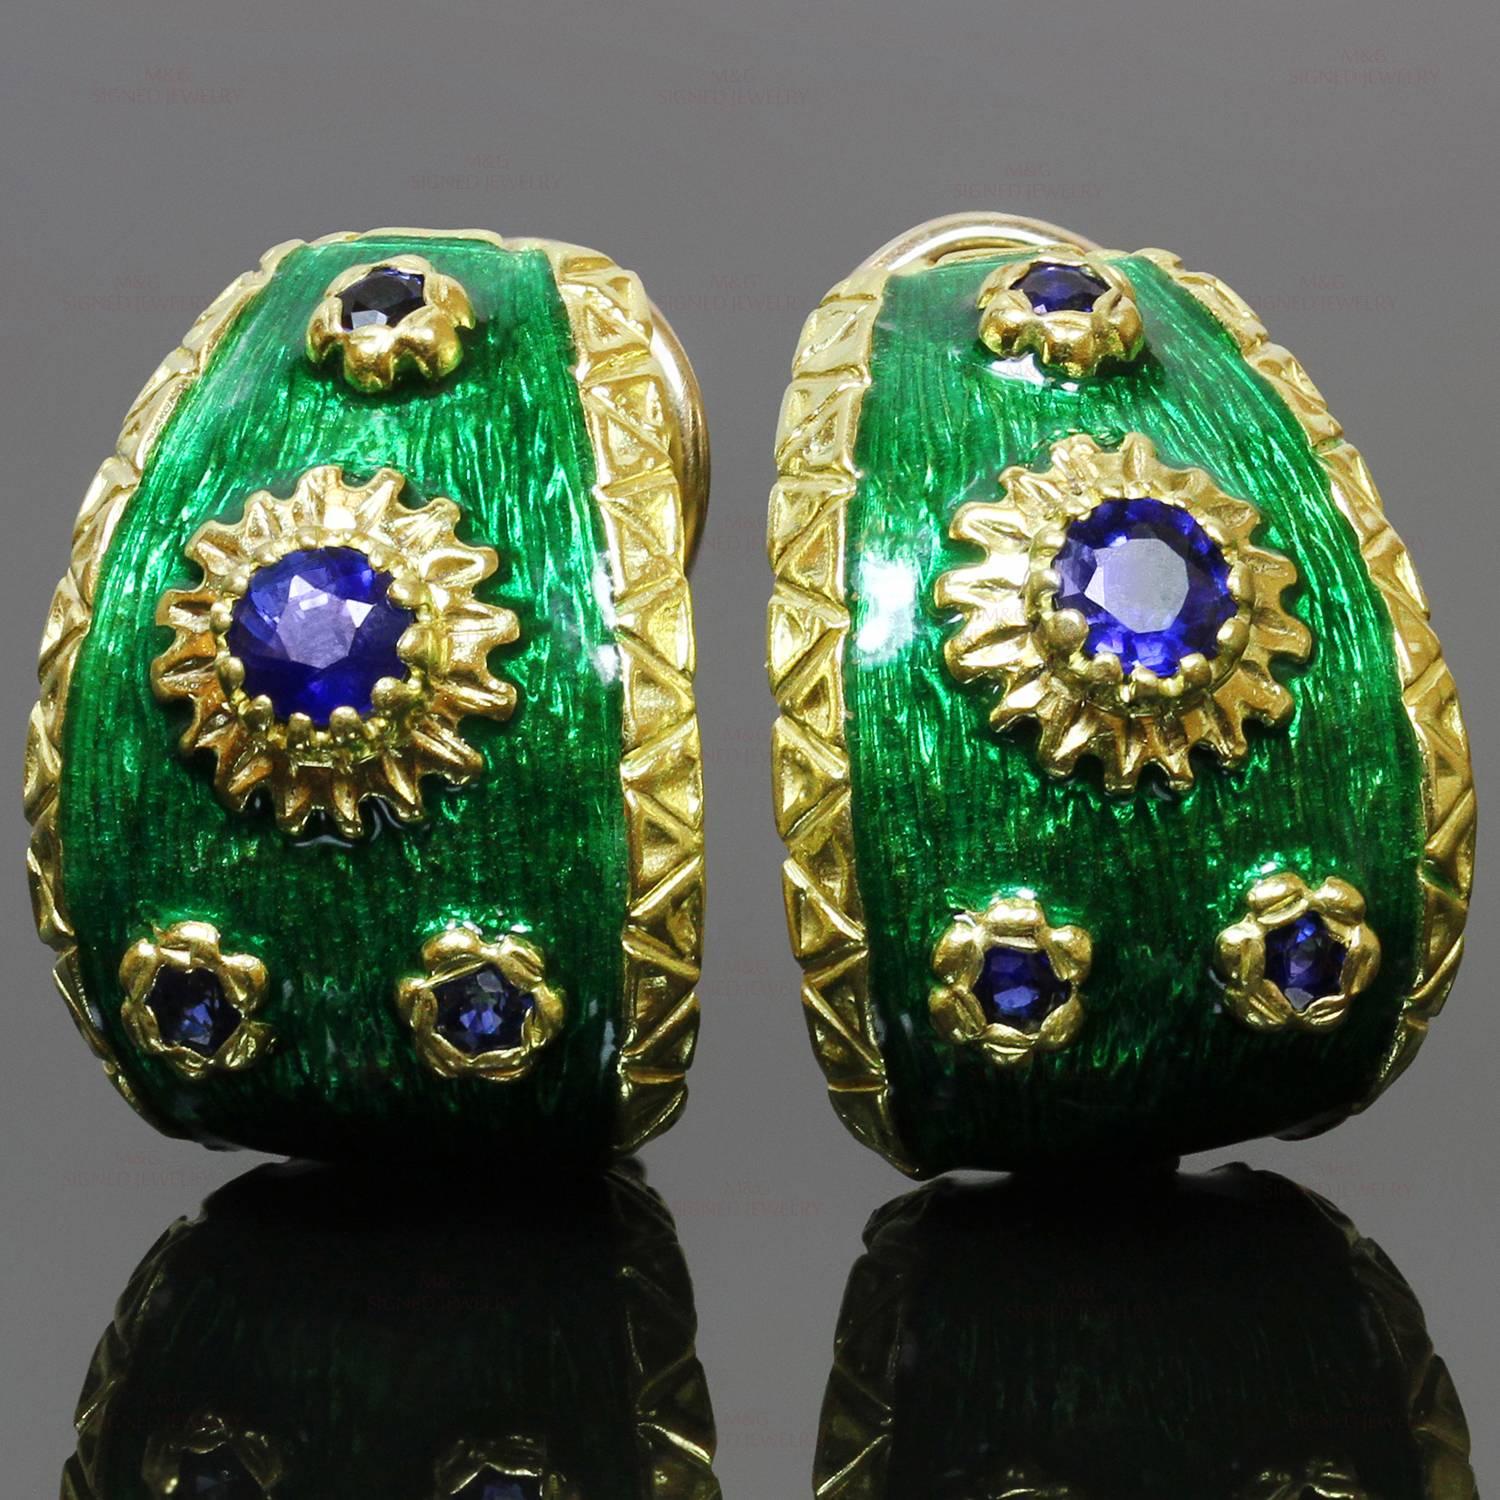 These classic lever-back earrings are crafted in 18k yellow gold and beautifully accented with green enamel and faceted round blue sapphires of an estimated 0.60 carats. Made in Italy circa 1990s. Measurements: 0.62" (16mm) width, 0.78"